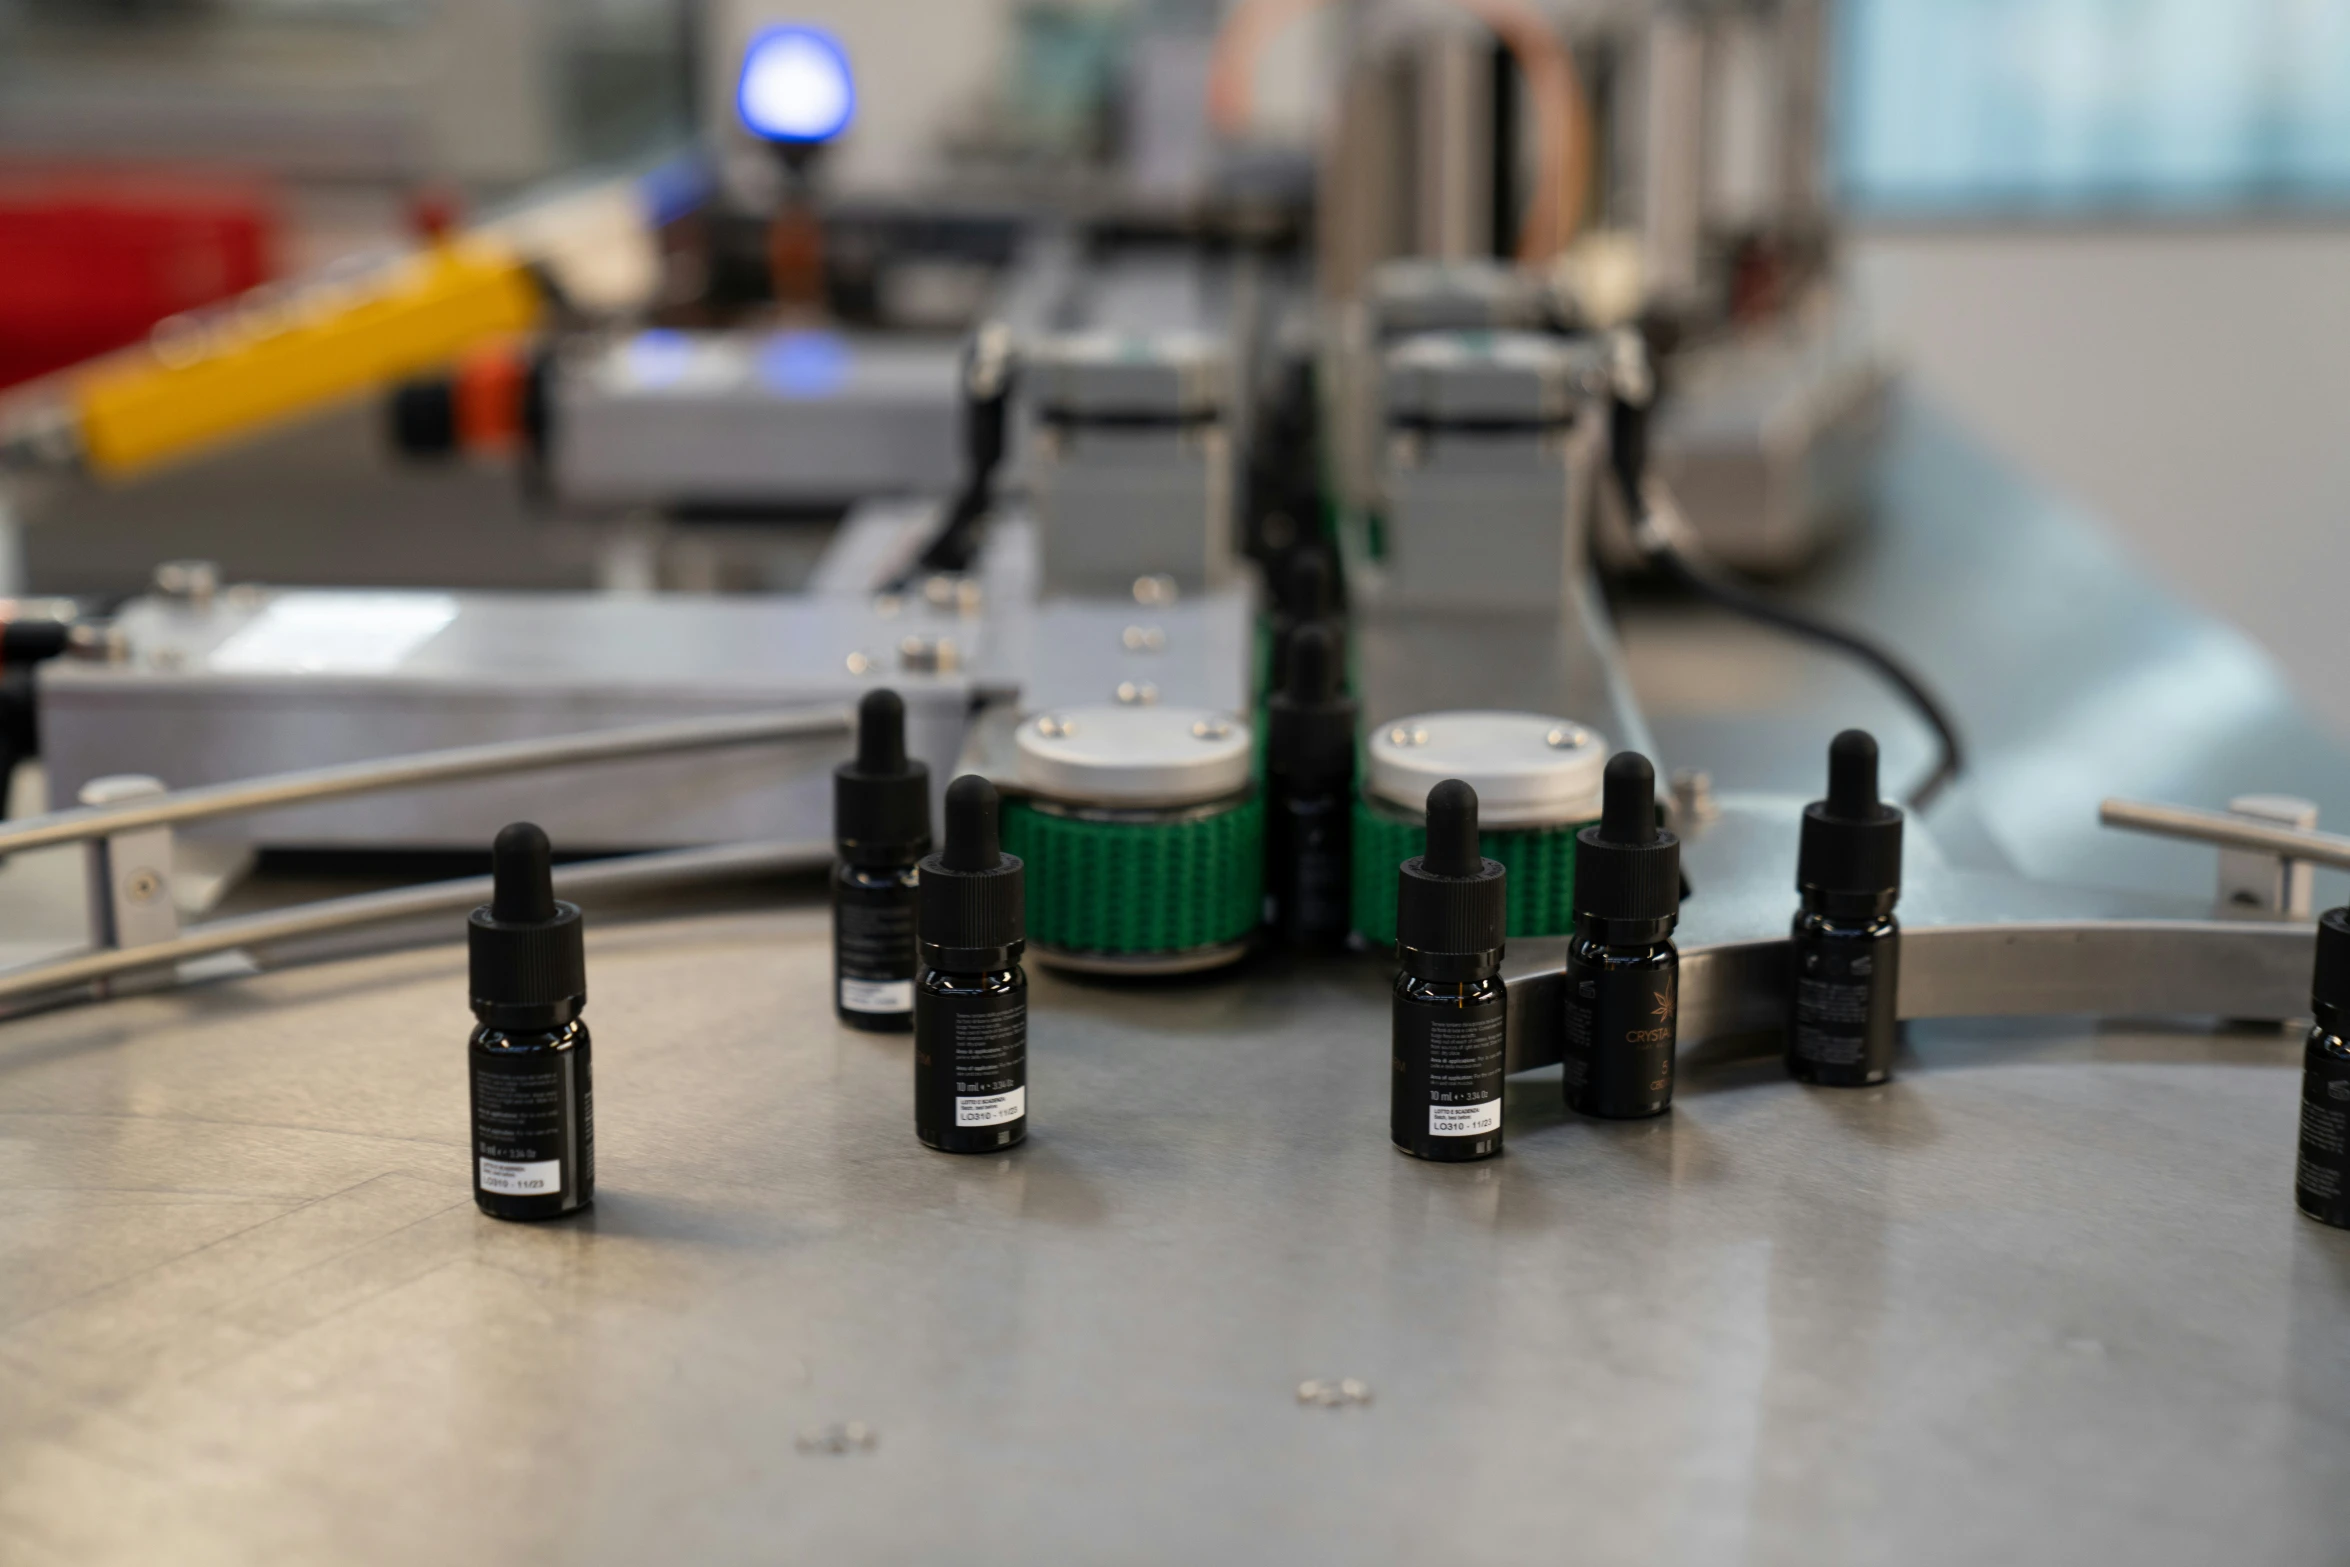 electronic equipment are shown together on a conveyor belt